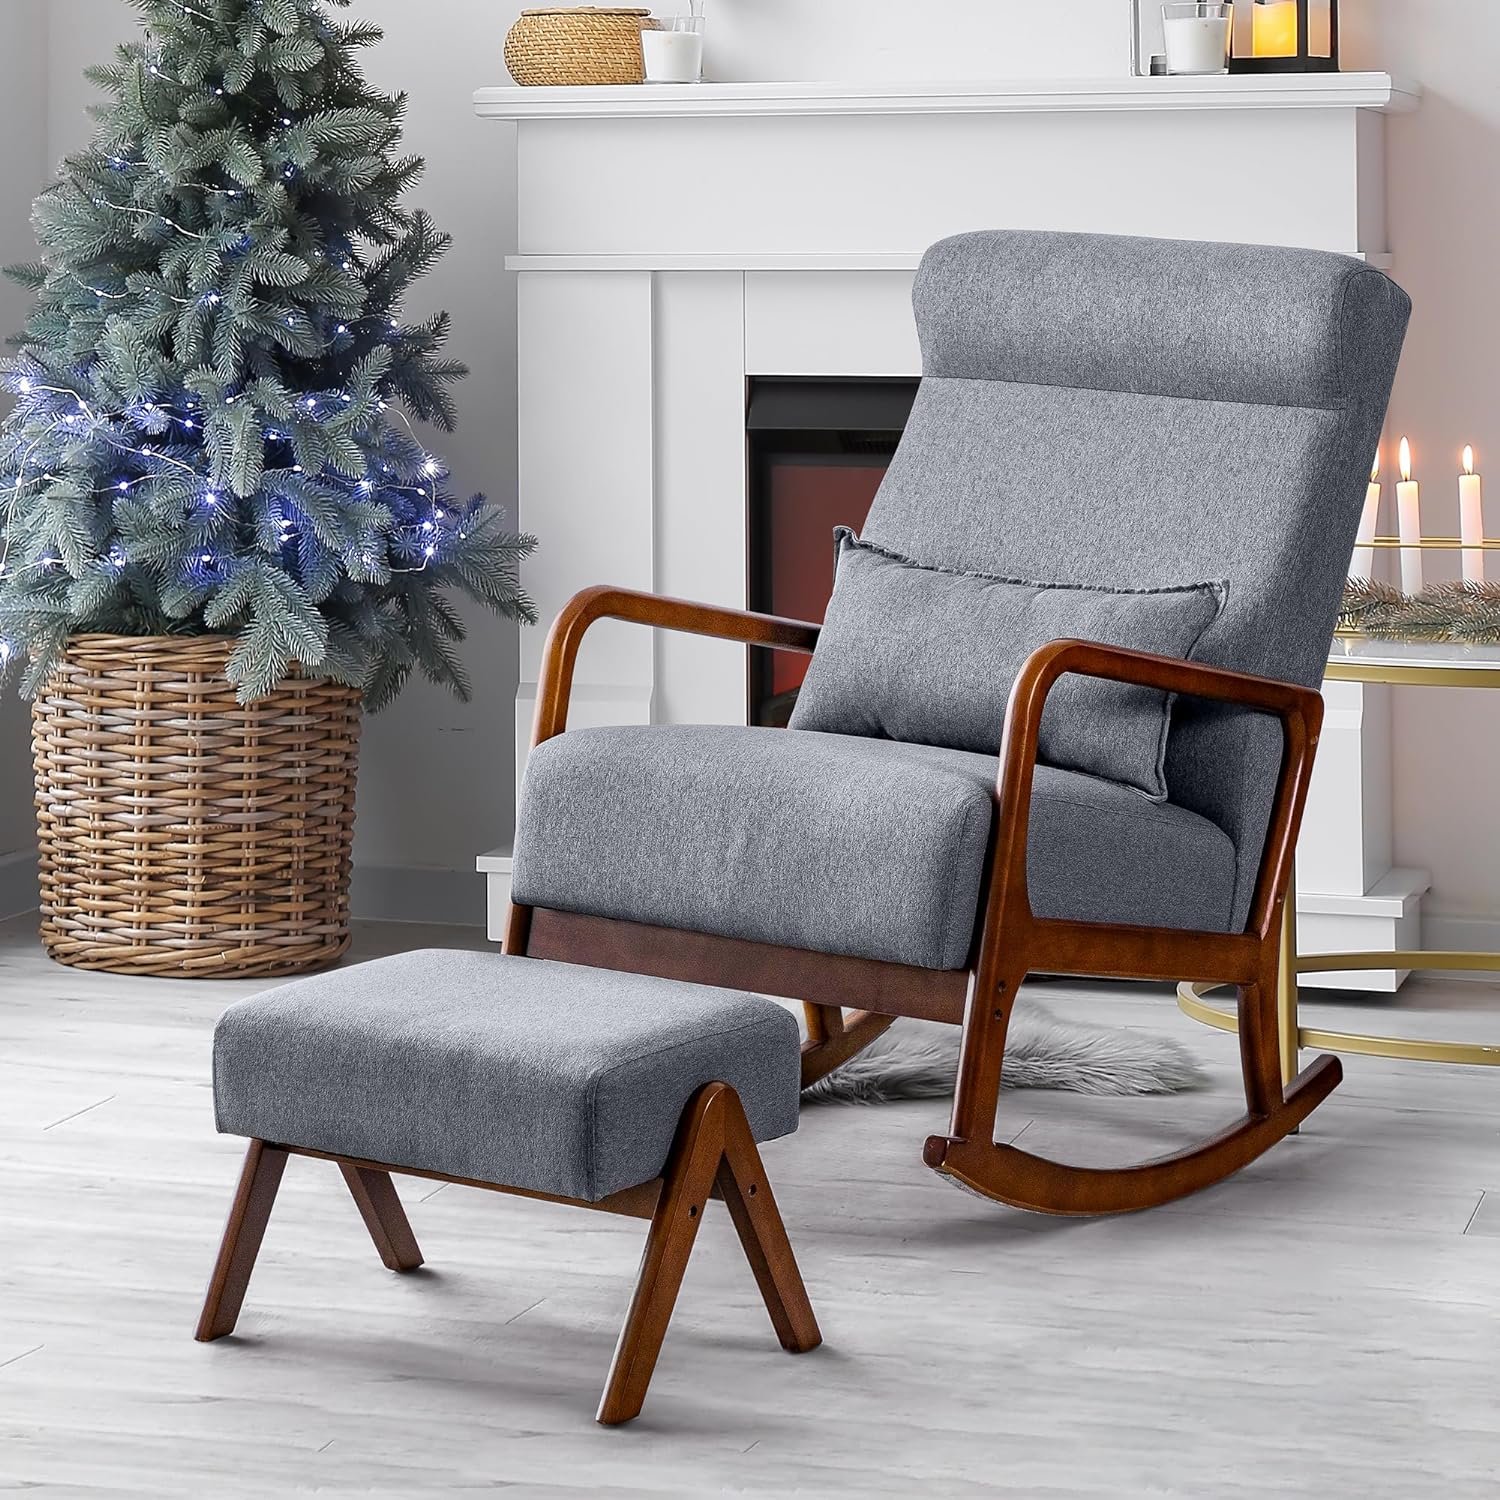 HOMREST Rocking Chair, Mid-Century Modern Upholstered Fabric Rocking Armchair with Ottoman  Thick Padded Cushion for Living Baby Room, Bedroom（Gray）